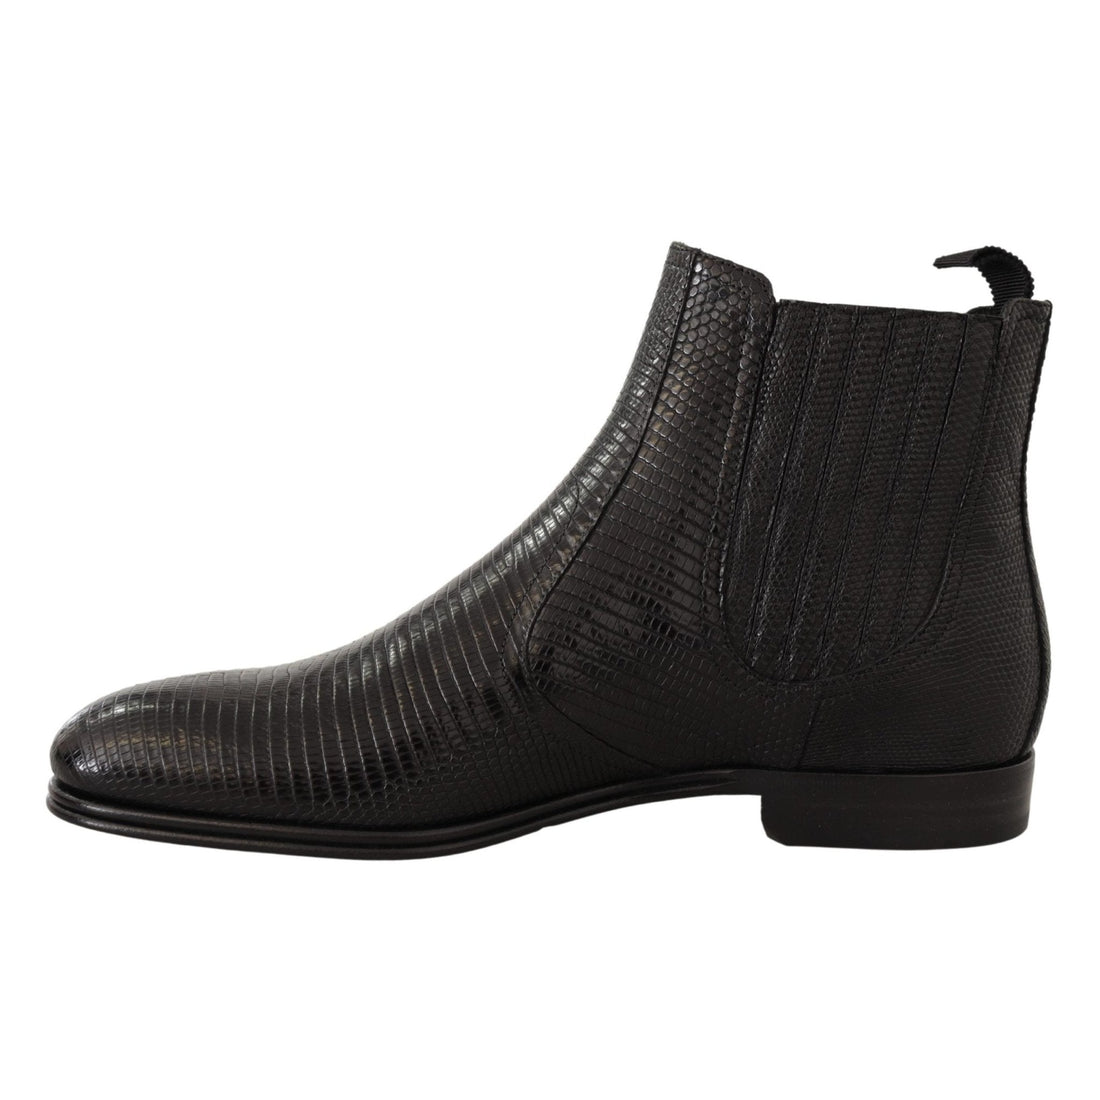 Dolce & Gabbana Black Leather Lizard Skin Ankle Boots - Paris Deluxe